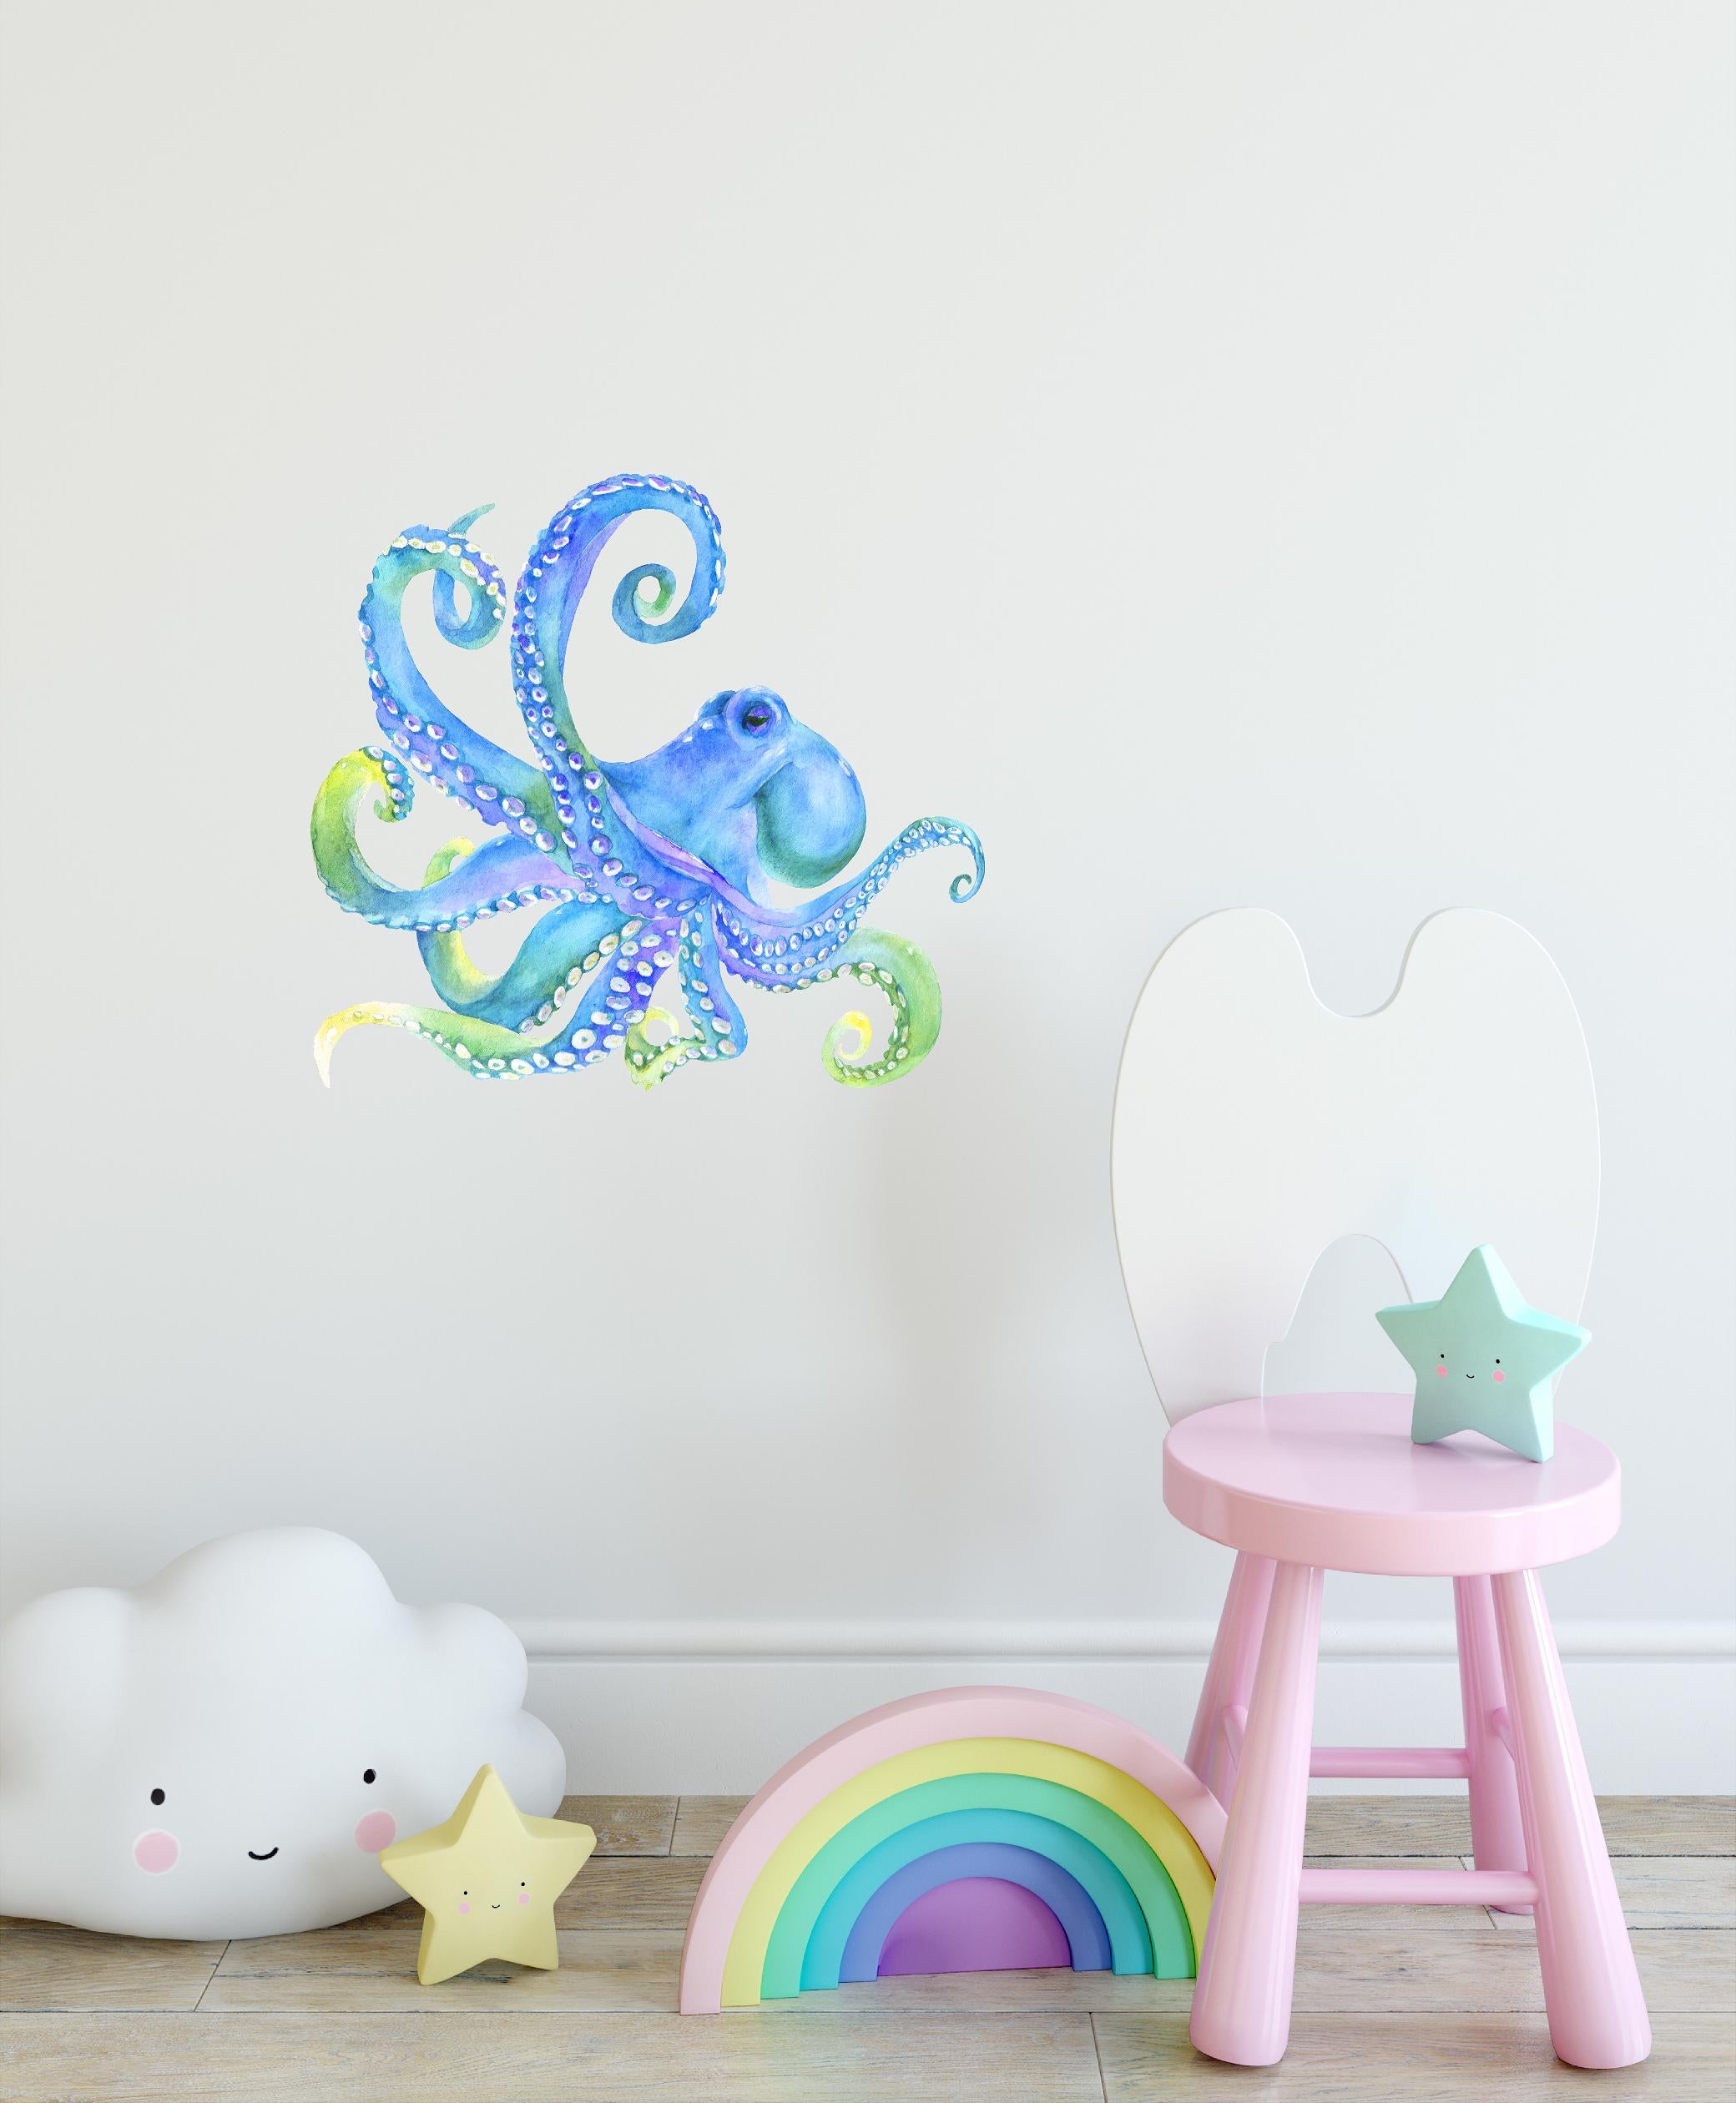 Watercolor Octopus #4 Wall Decal Blue Green Octopus Wall Sticker Removable Fabric Vinyl | DecalBaby